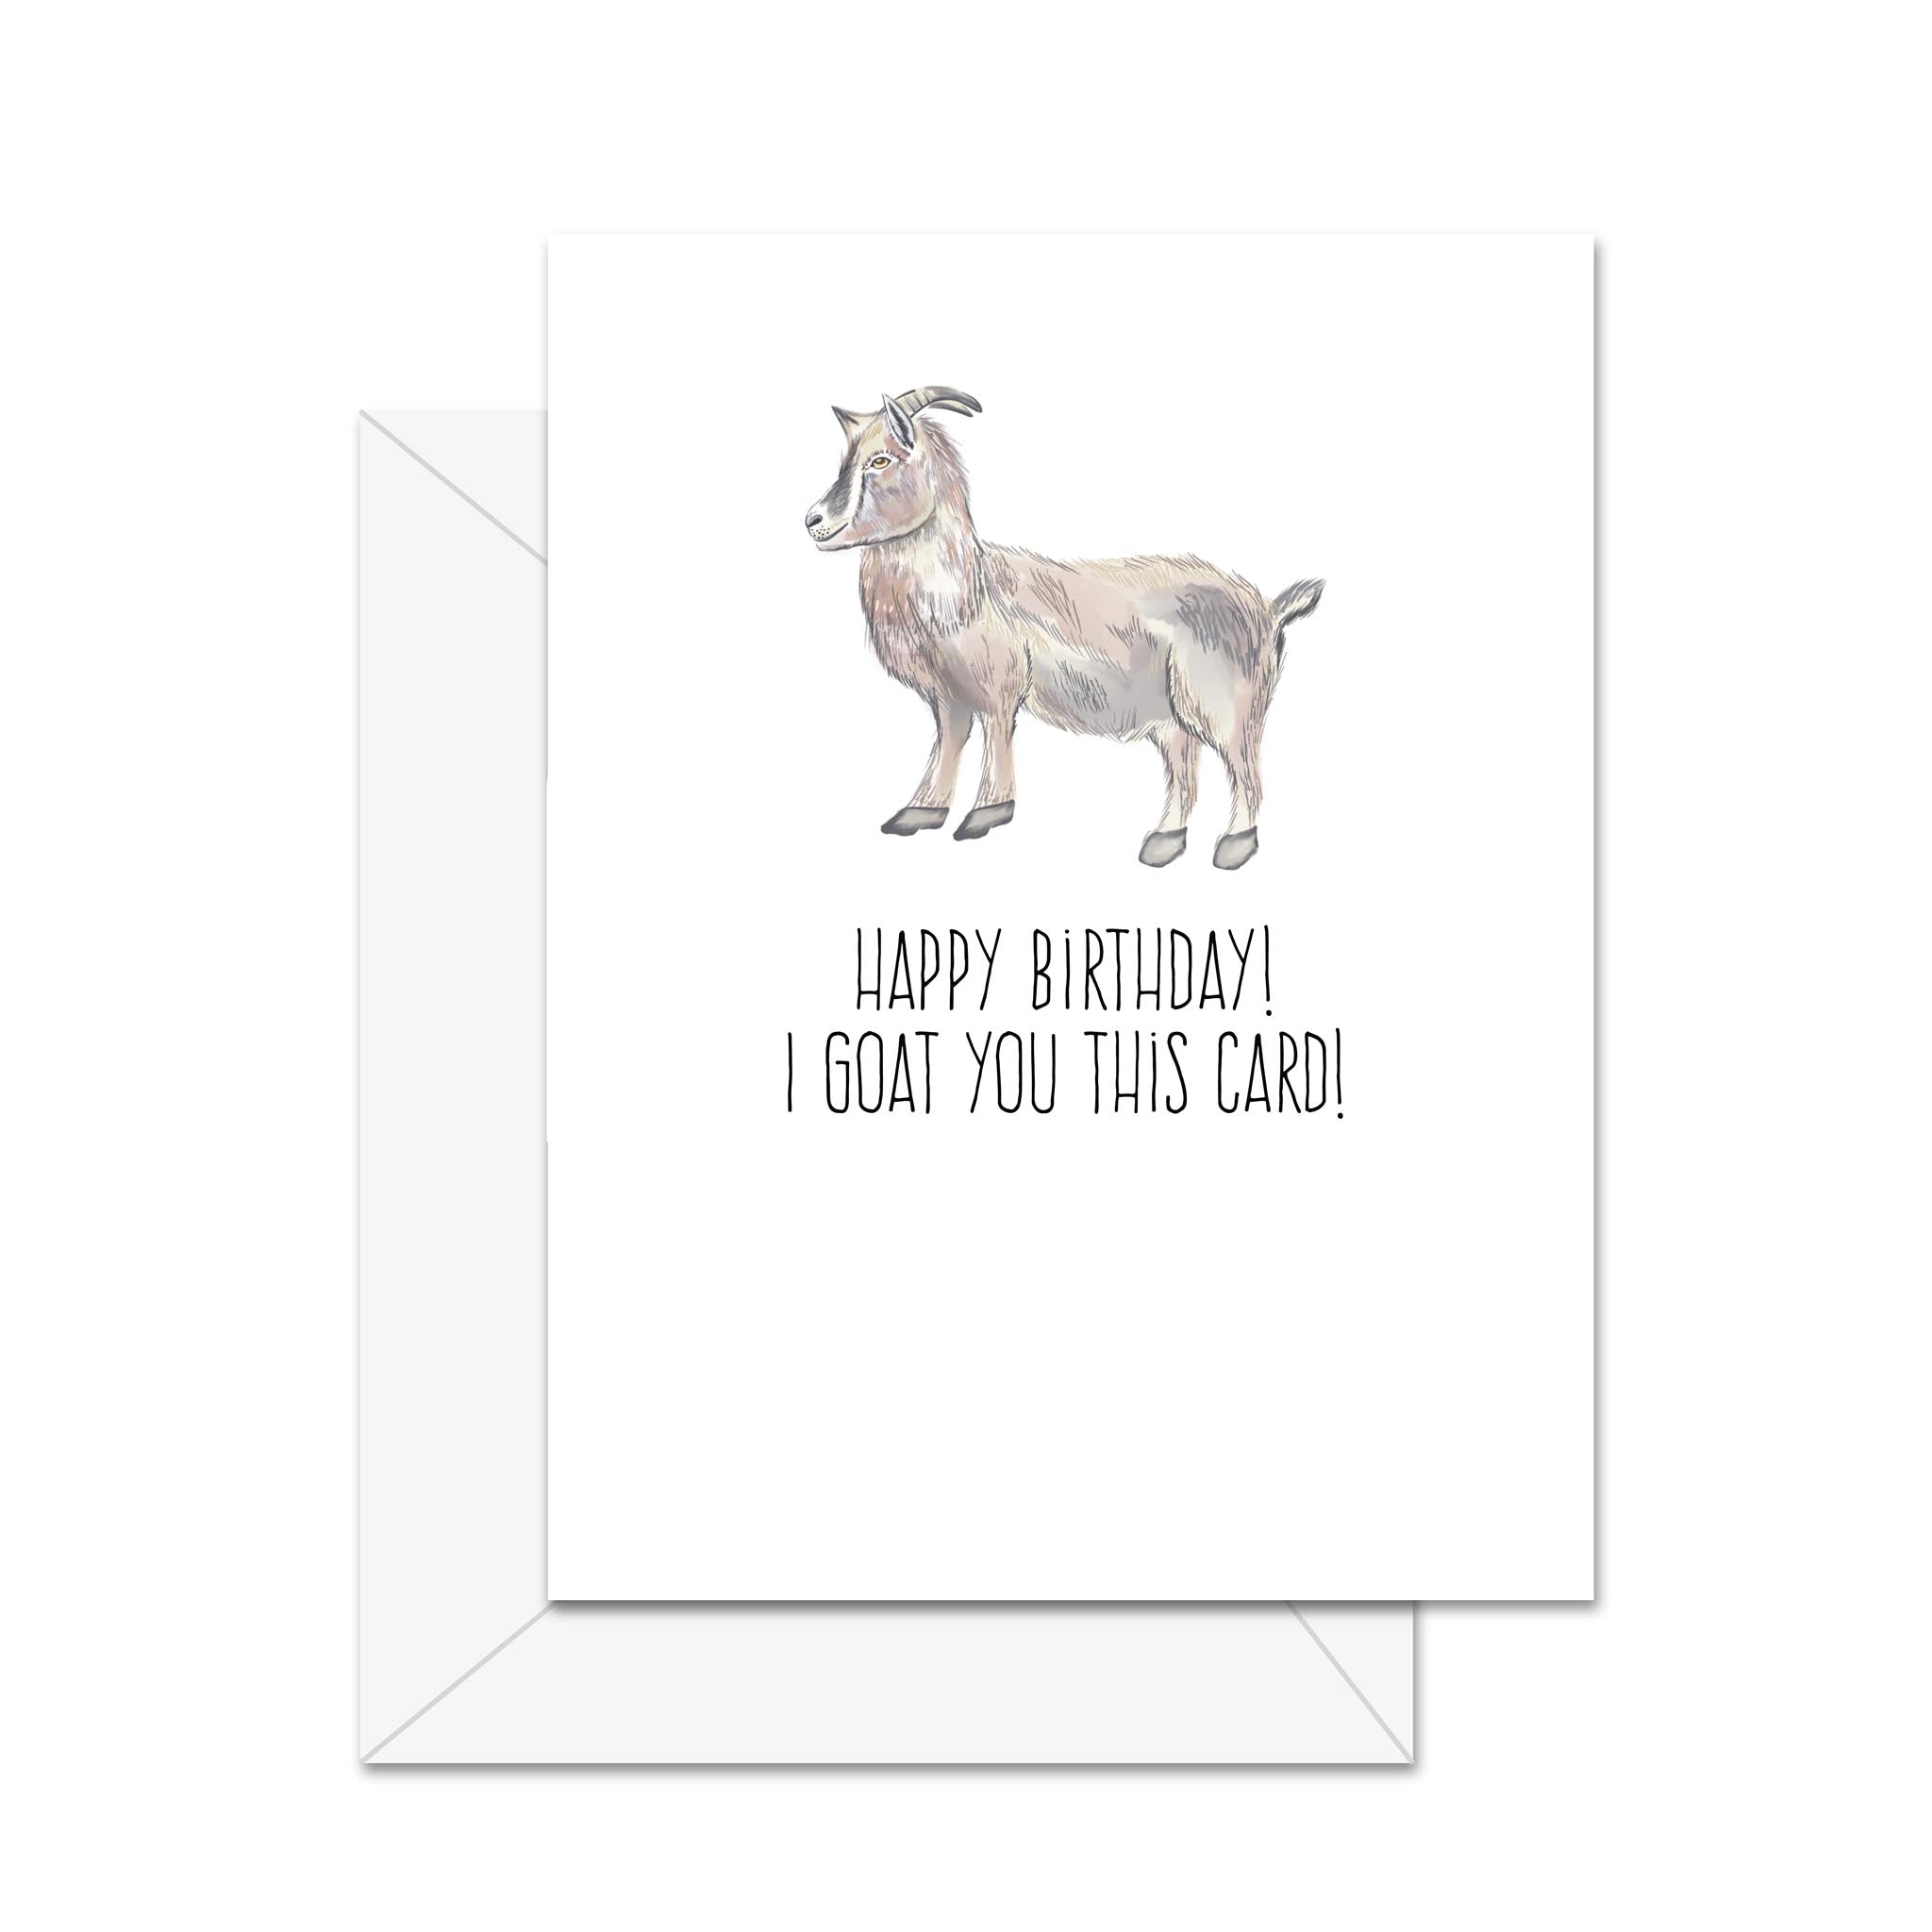 Goat Birthday Card, Gifts With Goats, Printable Goat Birthday Card